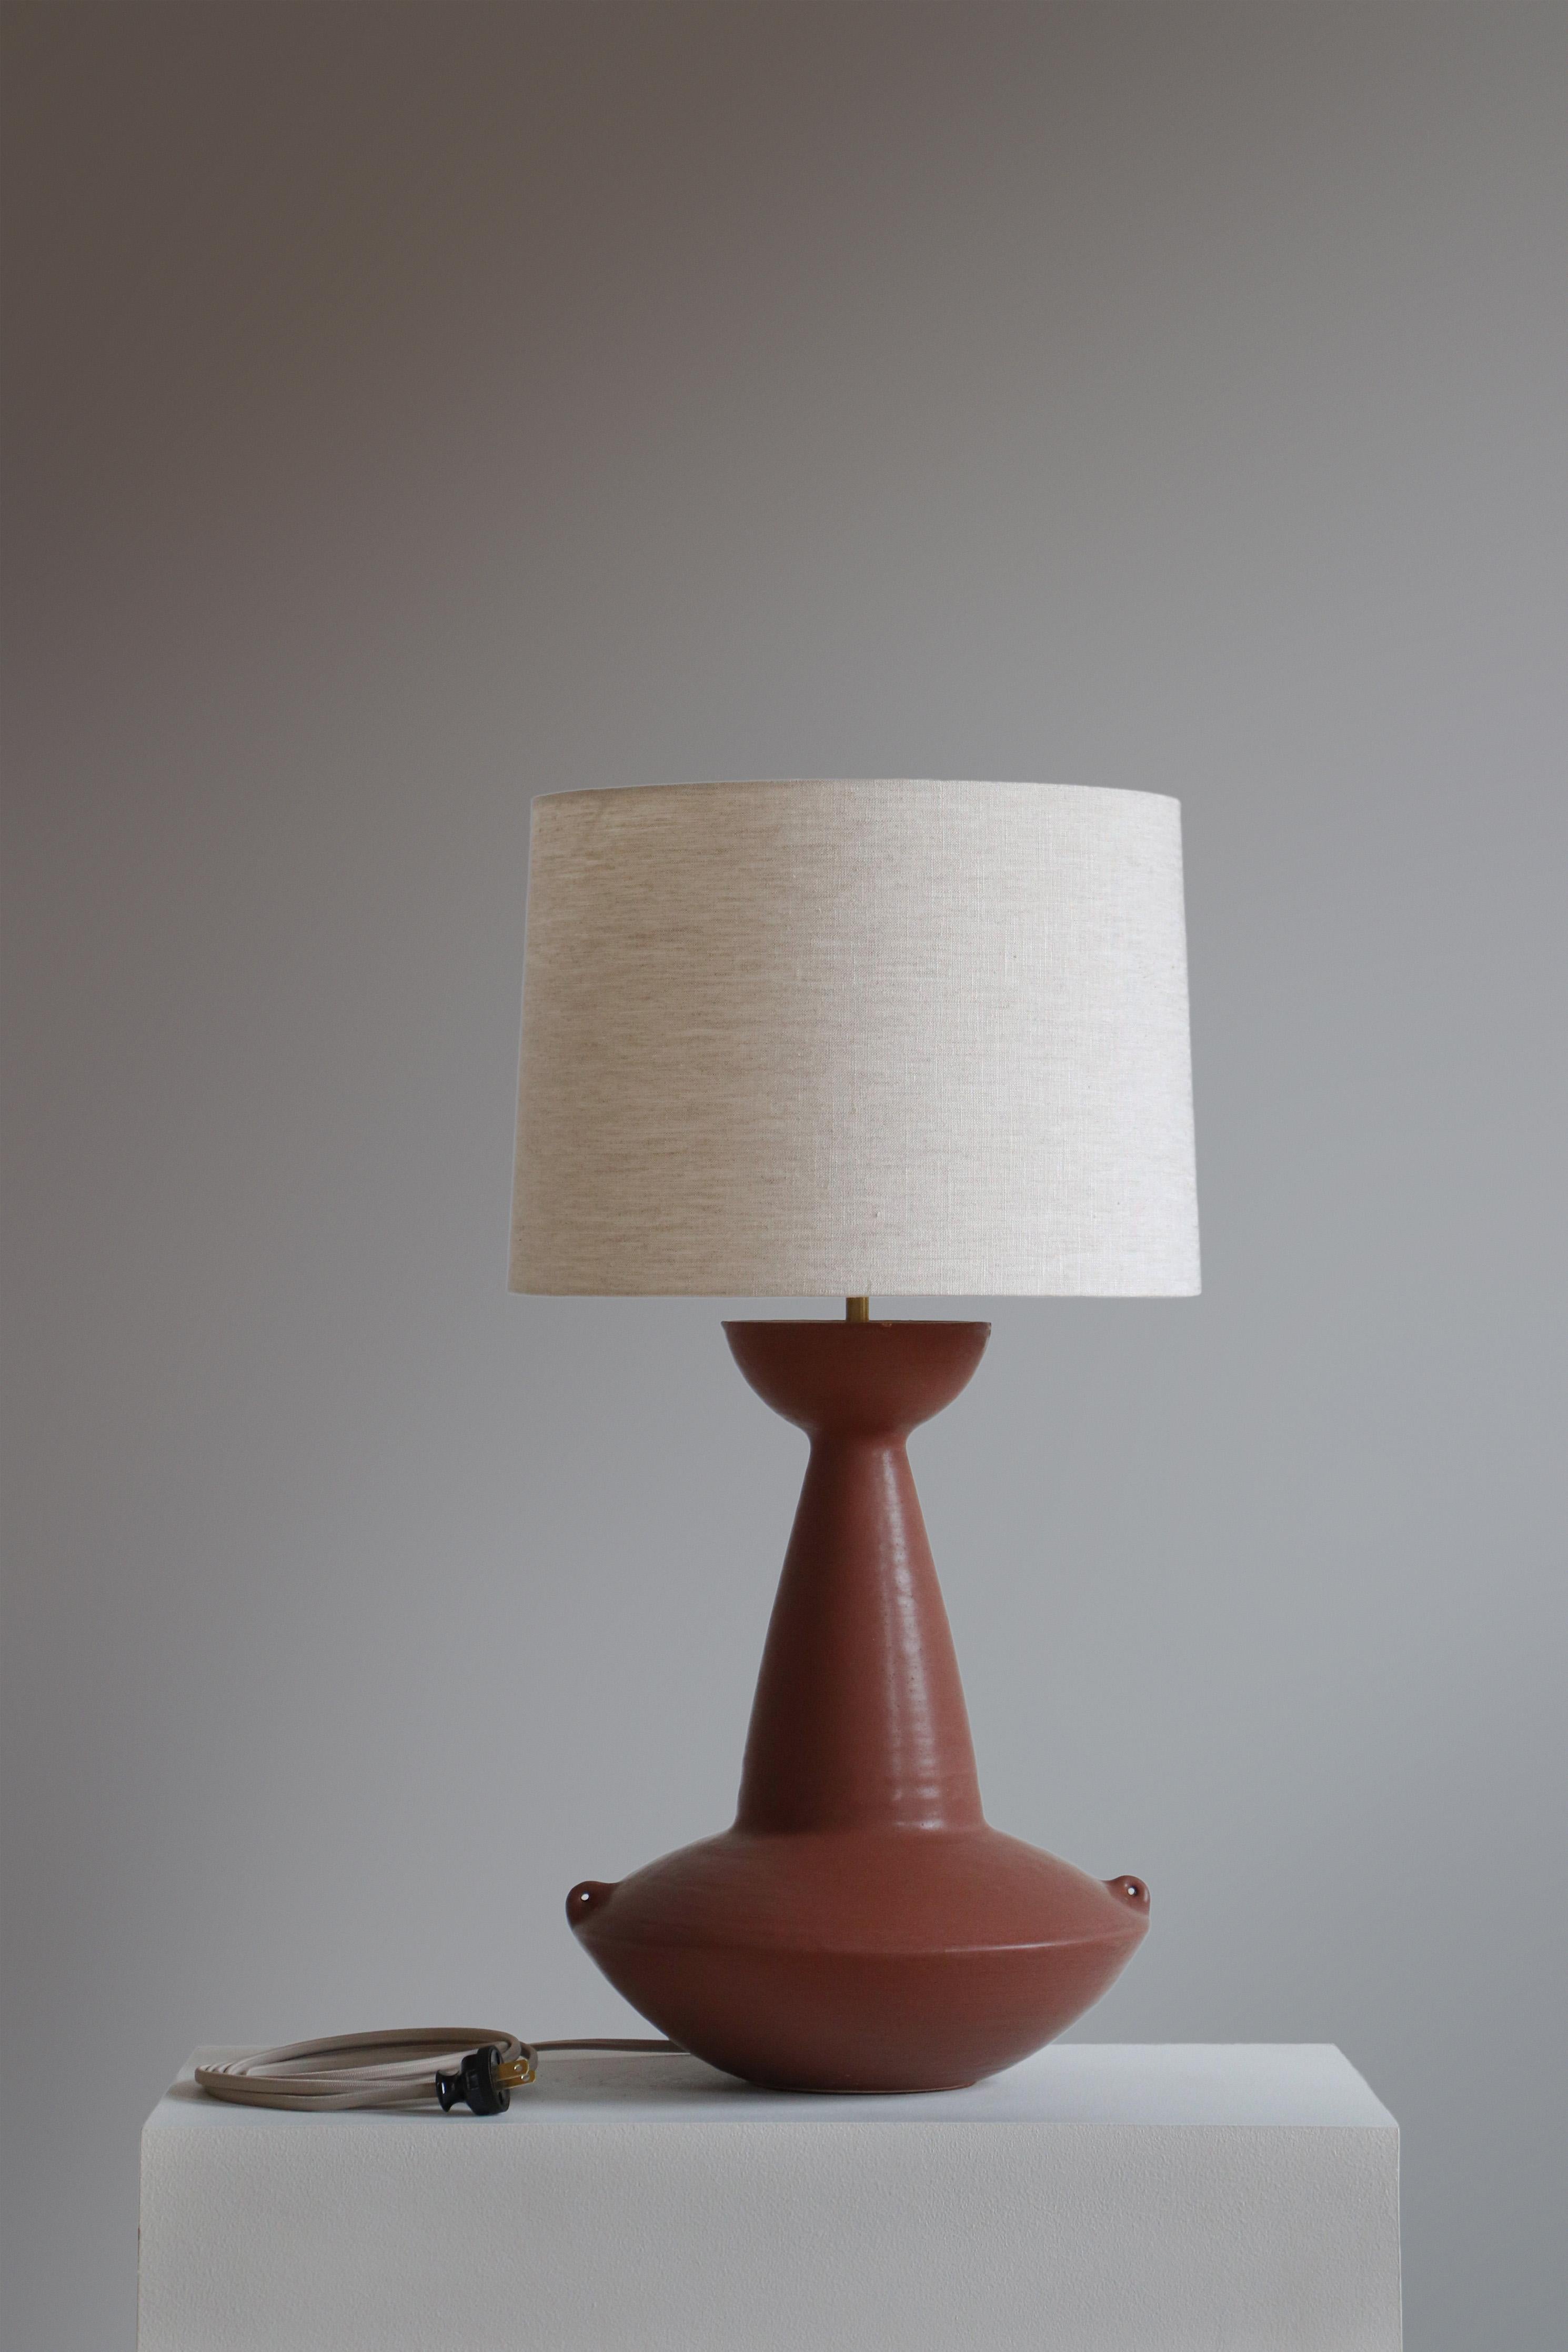 Chestnut Claudius Table Lamp by Danny Kaplan Studio
Dimensions: ⌀ 36 x H 69 cm
Materials: Glazed Ceramic, Unfinished Brass, Linen

This item is handmade, and may exhibit variability within the same piece. We do our best to maintain a consistent